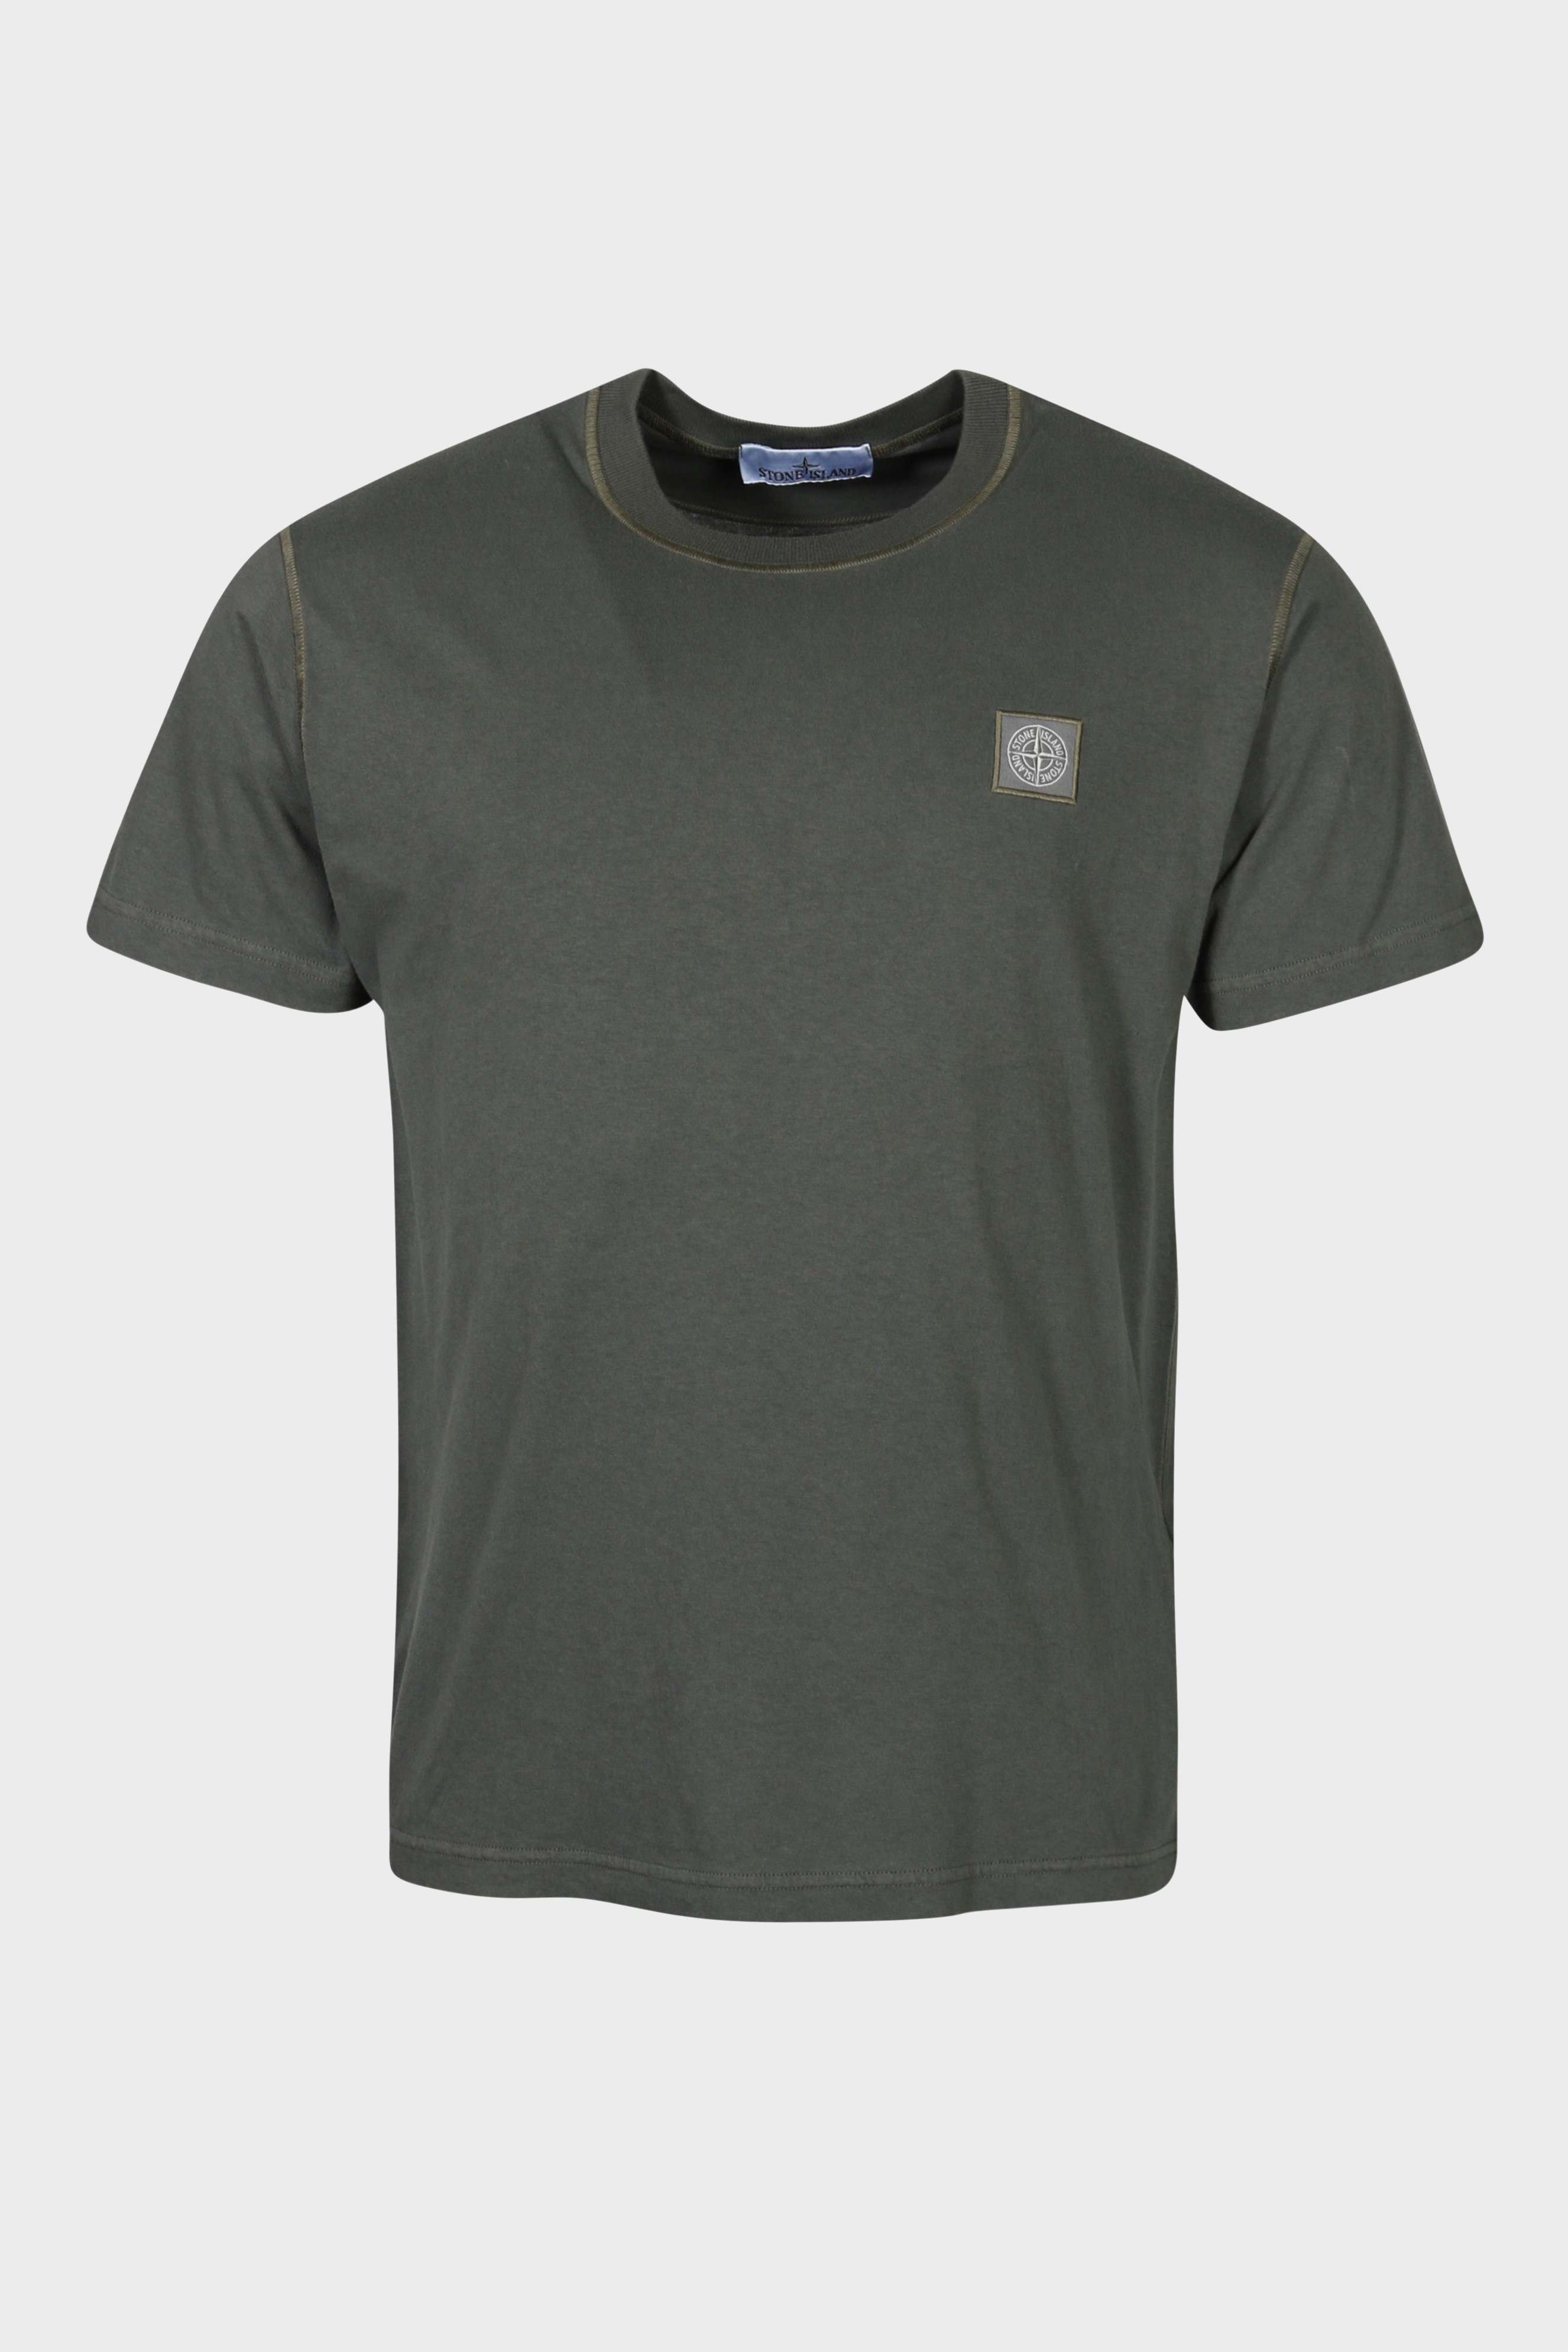 STONE ISLAND T-Shirt in Washed Green 3XL